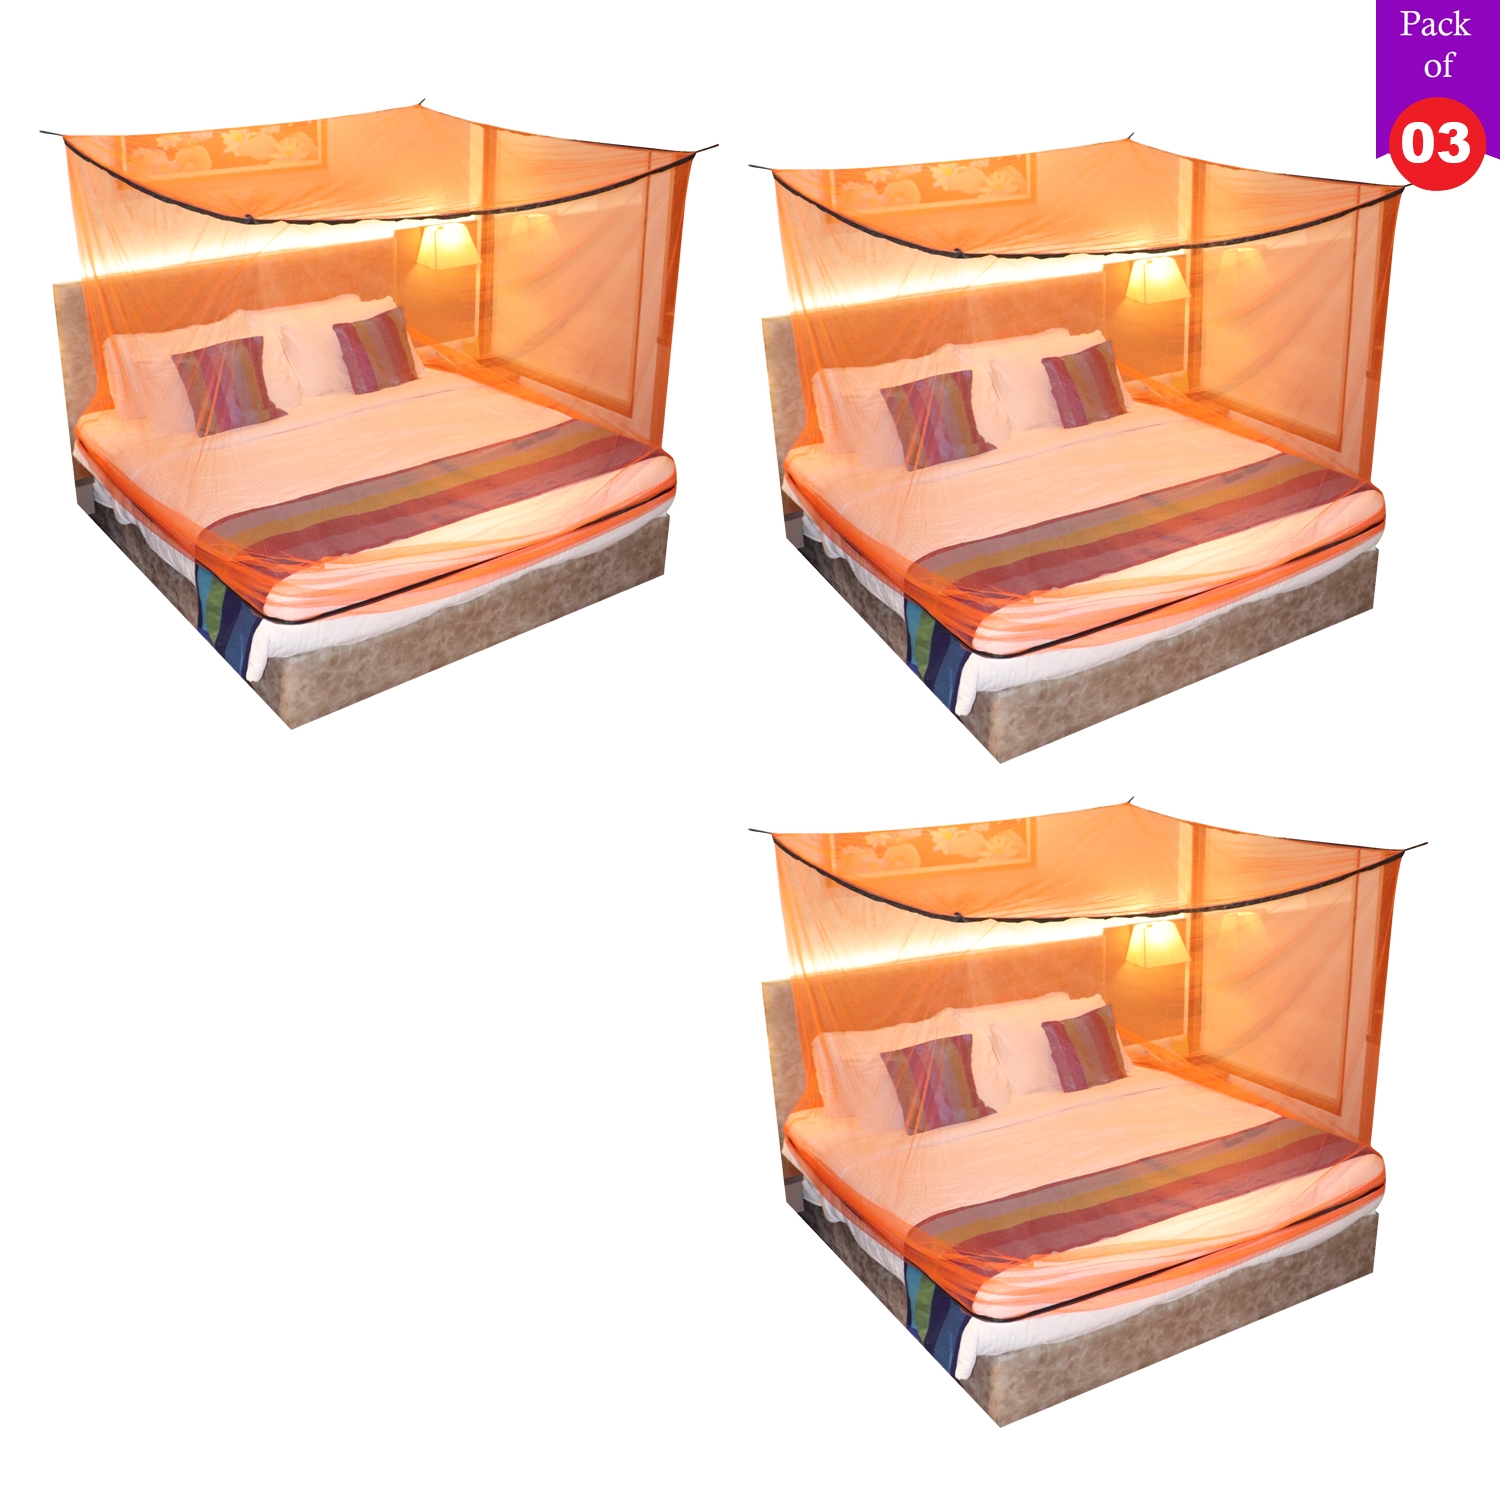 SILVER SHINE | Mosquito Net for Double Bed, King-Size, Square Hanging Foldable Polyester Net Orange And Black Pack of 3 2